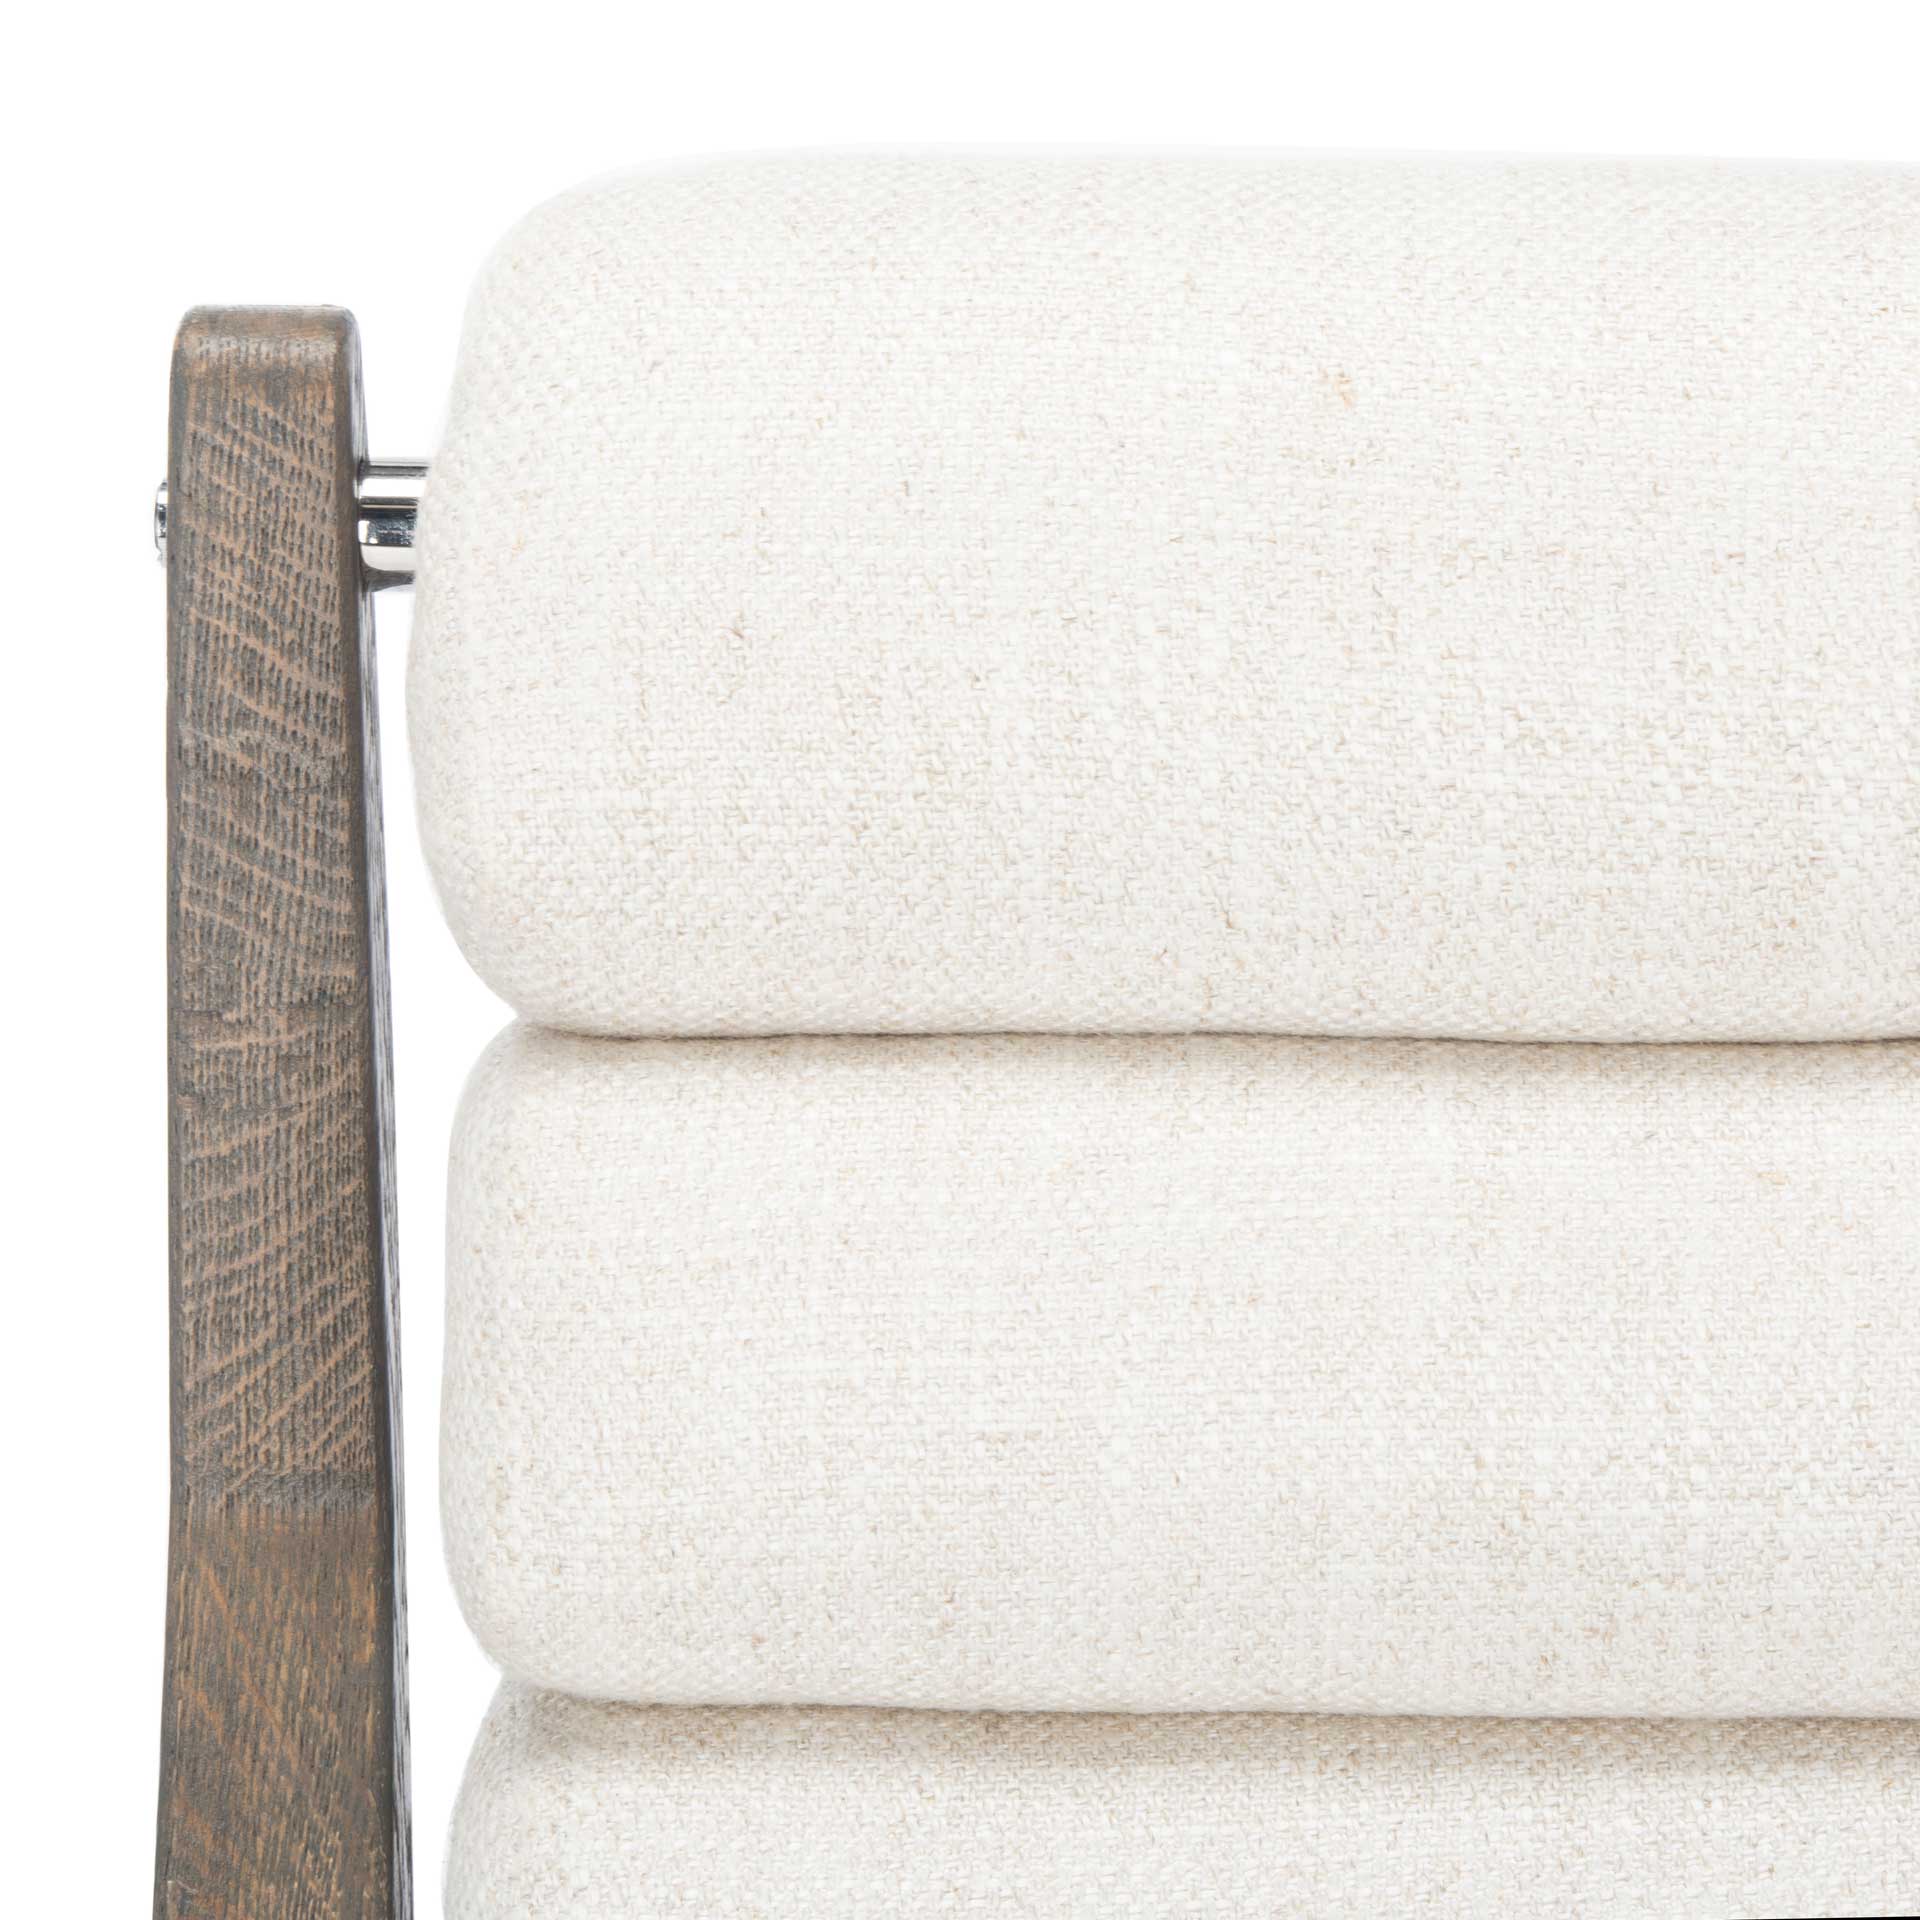 Delegation Channel Tufted Chair White